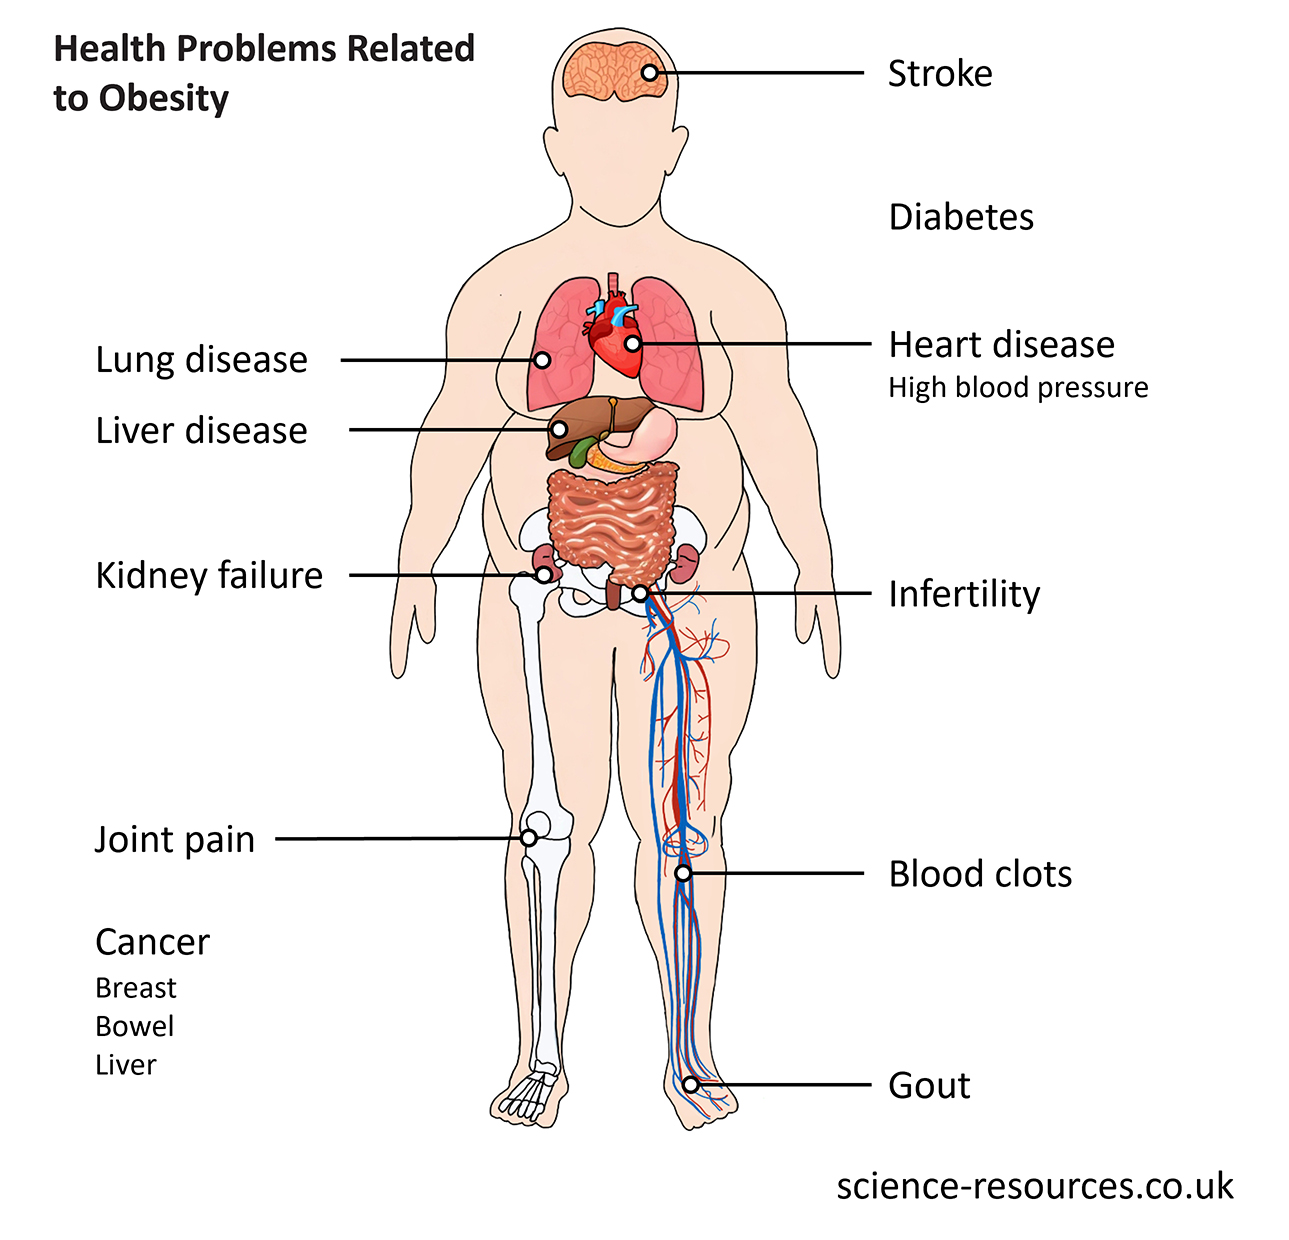 Image showing health problems related to obesity